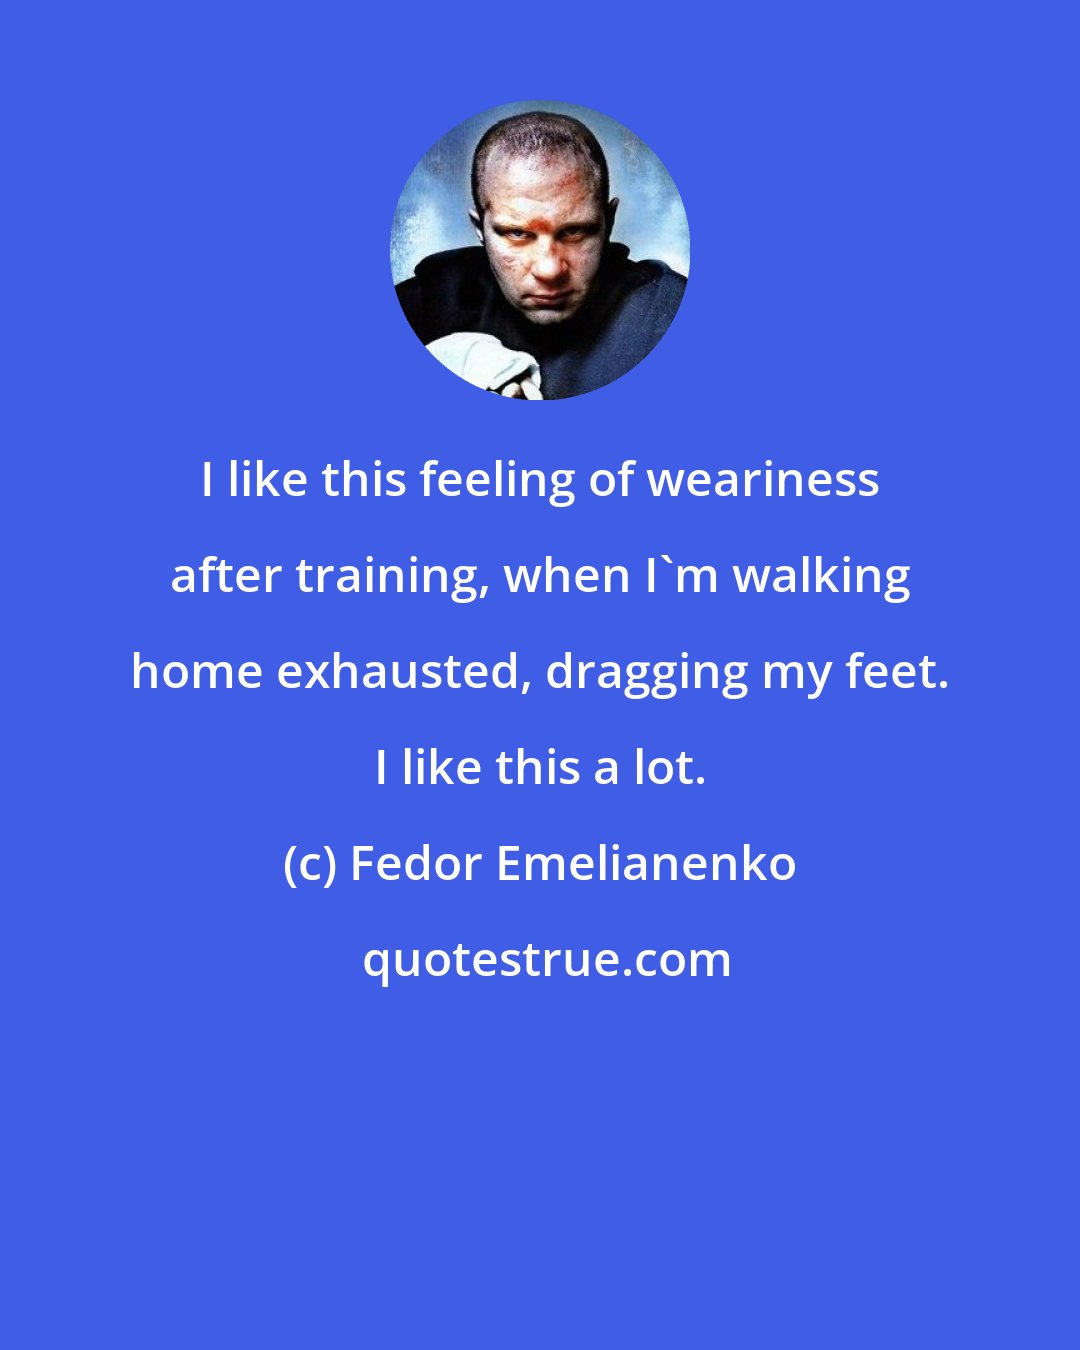 Fedor Emelianenko: I like this feeling of weariness after training, when I'm walking home exhausted, dragging my feet. I like this a lot.